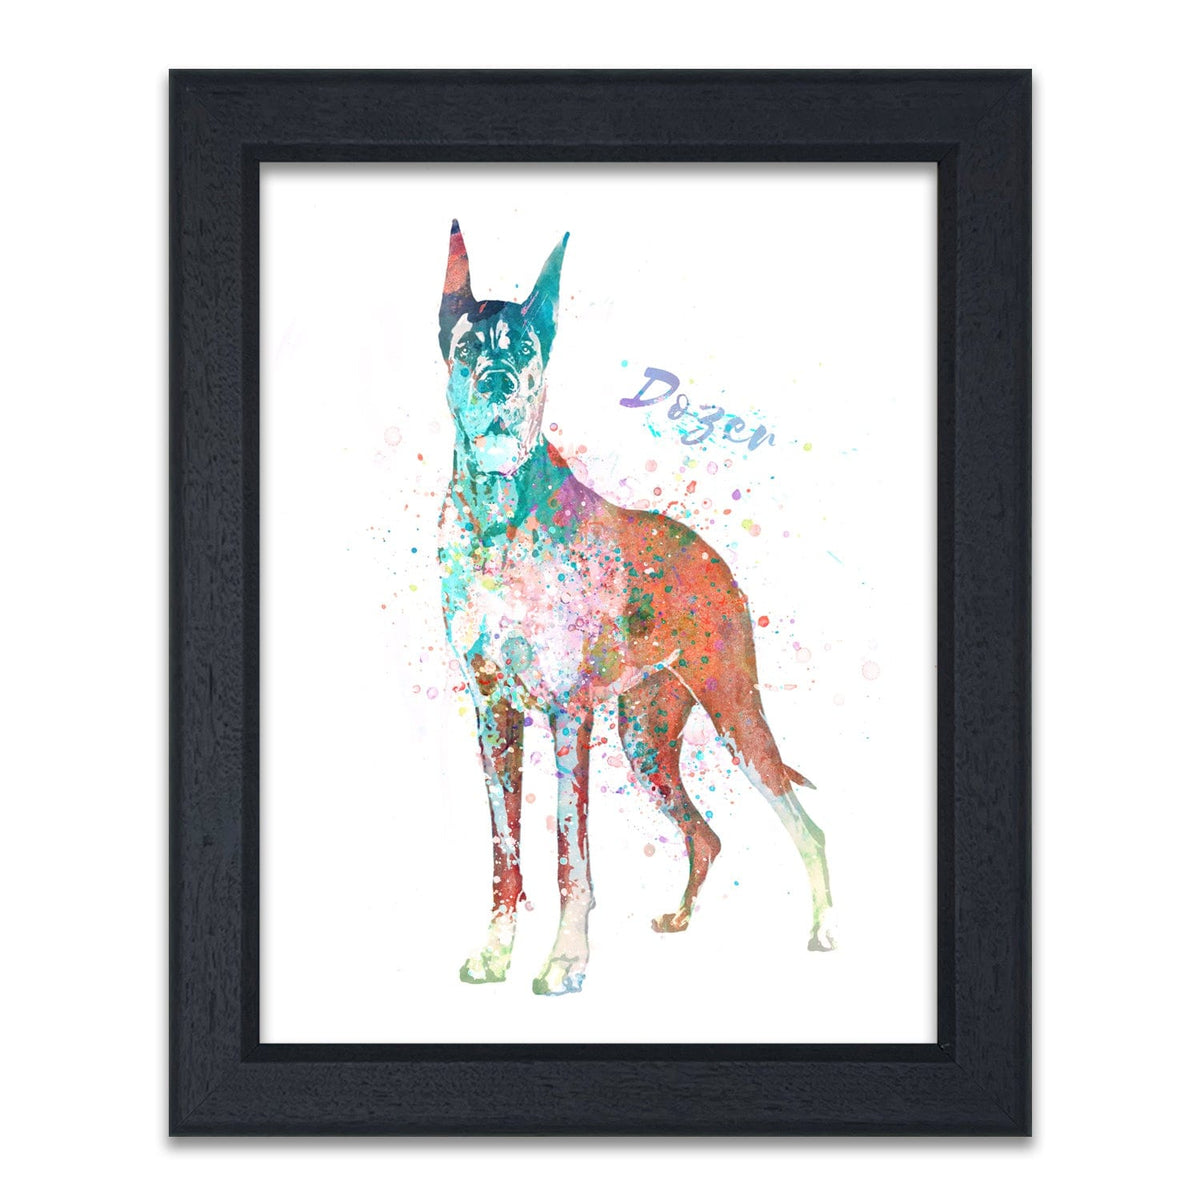 Framed pet dog artwork - personalized Great Dane gift from personal prints